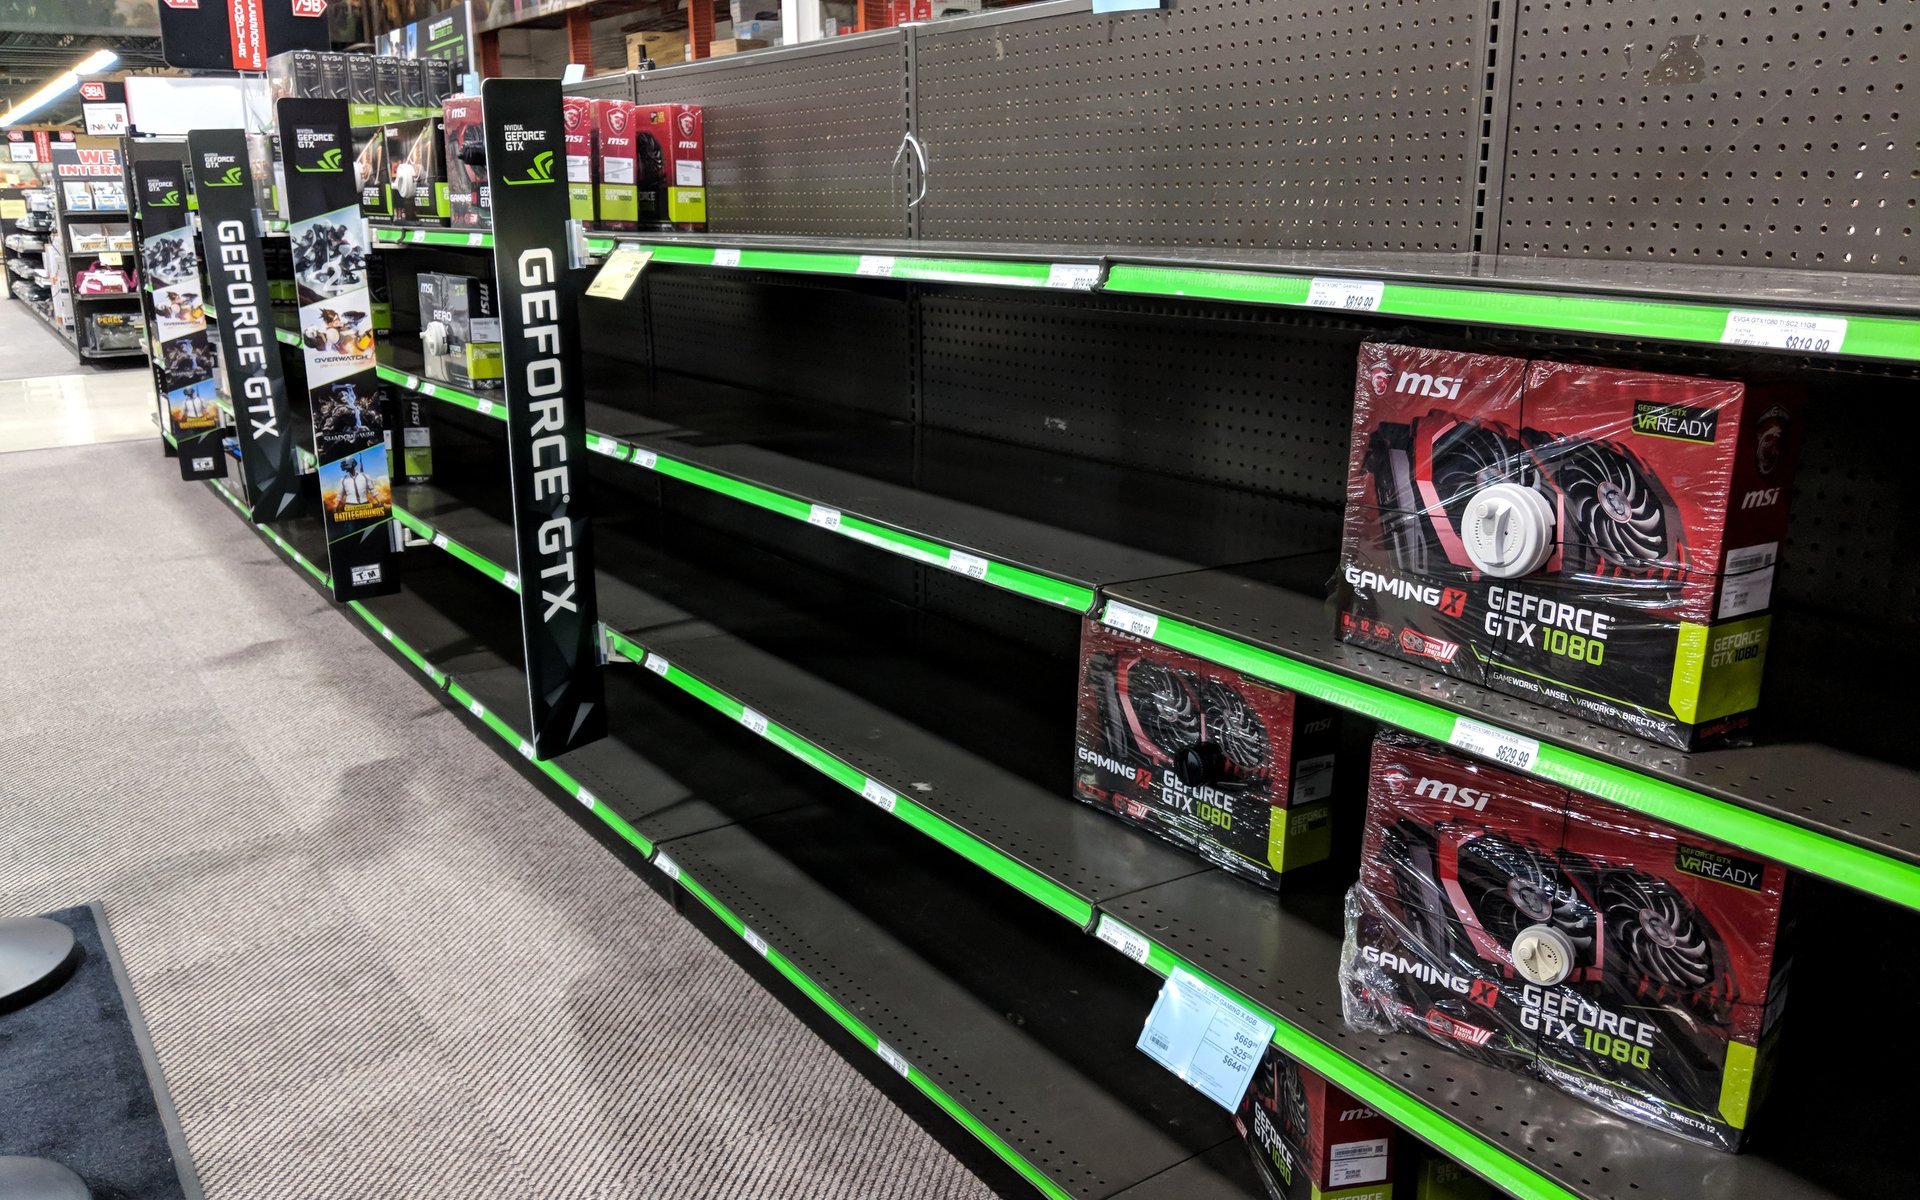 Will AMD and NVIDIA Give Up on GPU Mining as Cryptocurrency Prices Fall?